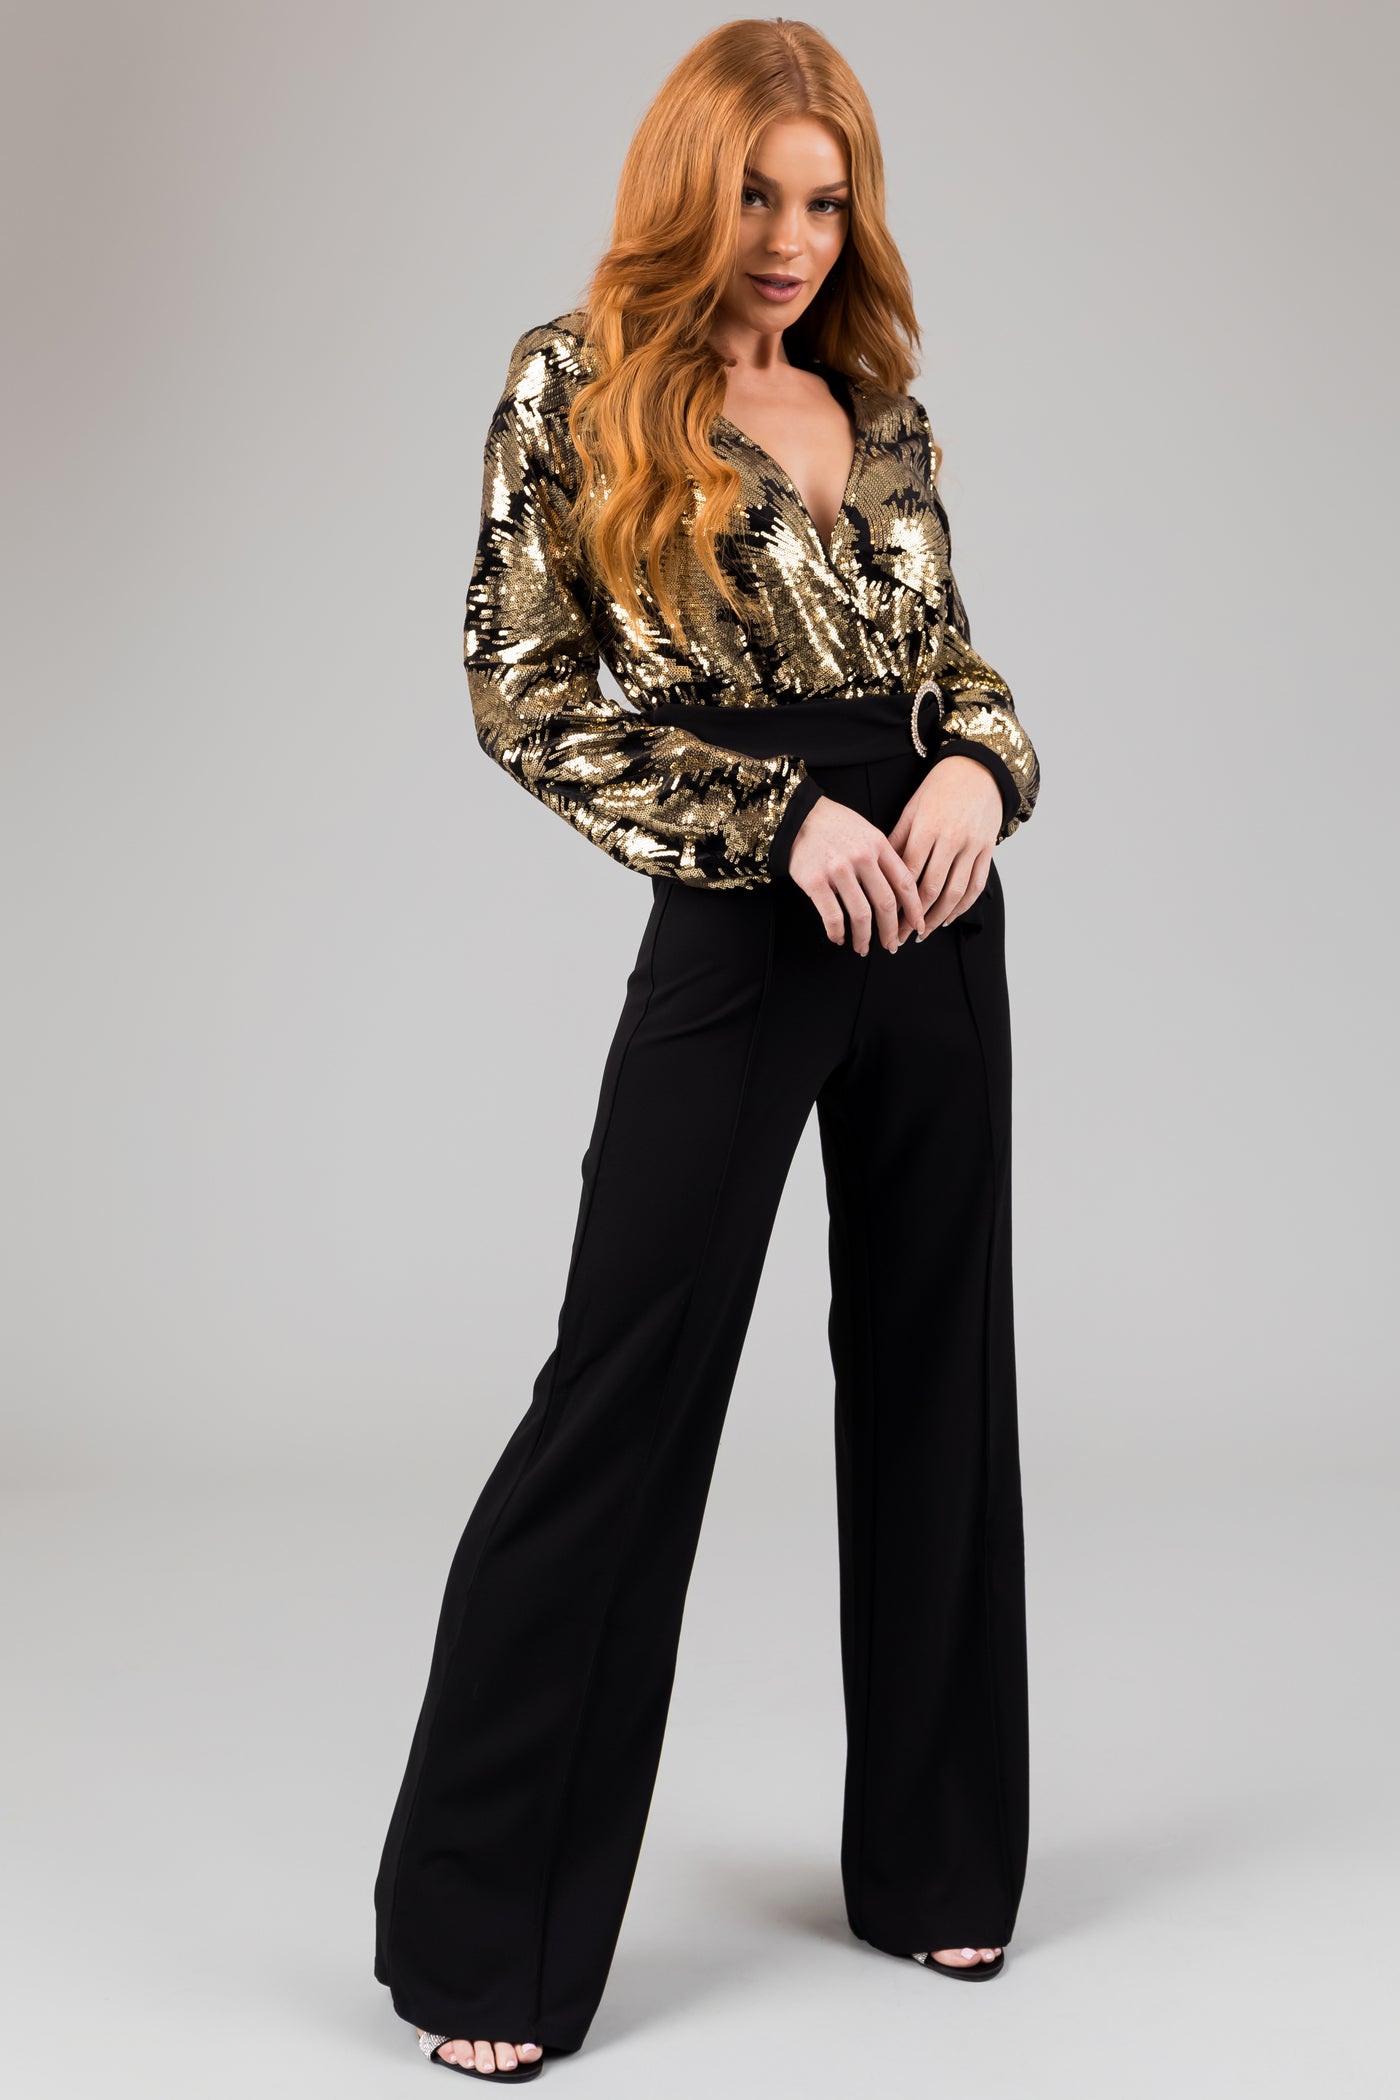 Black and Gold Sequin Long Sleeve Jumpsuit